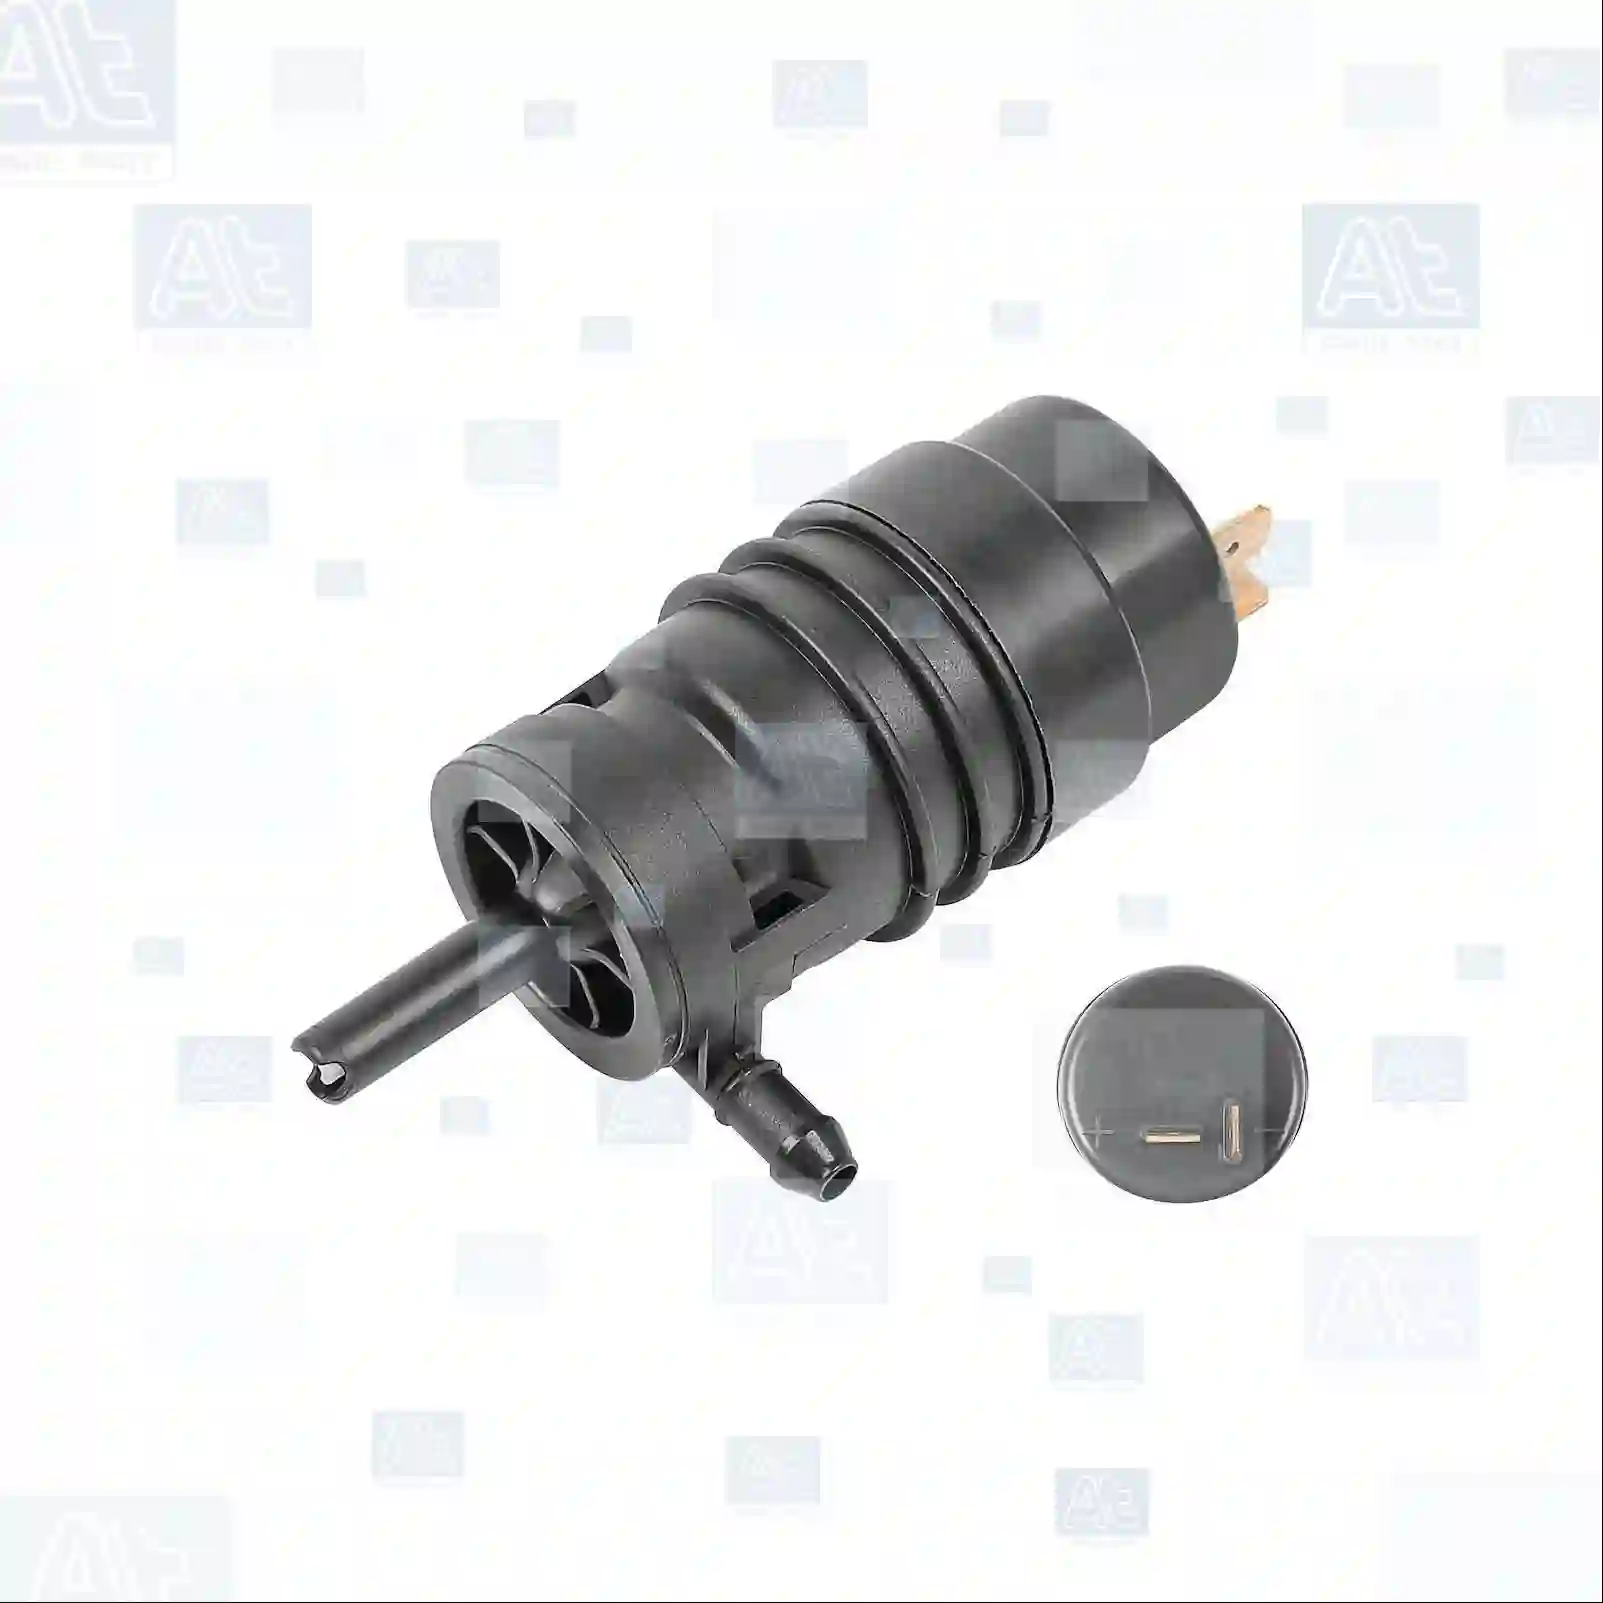 Washer pump, at no 77718042, oem no: 05979027, 07578192, 46443793, 46760972, 60808979, 71730139, 171955651, 2D0955651A, 431955651, 437955651, 861998151B, 00013685853, 1368569, 1368585, 61661358328, 61661360905, 61661367616, 61661368549, 61661368569, 61661368585, 61661368589, 61661370033, 61661370465, 61661380068, 67128360244, 1964696C2, 5103700AA, 5124950AA, 643474, 643484, 0000694910, 01175804, 04376950, 5103700AA, 3582441M10000, G816810190020, V302407000000, 05979027, 07578192, 46443793, 46760972, 5979027, 60808979, 71730139, 7578192, 1958437, 1958438, 90045820, 90492356, 04855729, AL61306, AL79013, 2108520800920, 05979027, 07578192, 46443793, 46760972, 60808979, 71730139, 0008600726, 0008601026, 0008601326, 0008602026, 0008603326, 0008603526, 6388600126, 1450156, 1450174, 1450182, 643474, 643484, 431955651, 92862817200, 8593477, 9506379, 171955651, 1L0955681, 2D0955651A, 431955651, 437955651, 171955651, 2D0955651A, 431955651, 437955651, 5350661245, 11305471, 11883646, 1259832, 171955651, 3205207, 3477646, 171955651, 1L0955681, 2D0955651, 2D0955651A, 431955651, 437955651, 861998151B, KSP955651, ZG21277-0008 At Spare Part | Engine, Accelerator Pedal, Camshaft, Connecting Rod, Crankcase, Crankshaft, Cylinder Head, Engine Suspension Mountings, Exhaust Manifold, Exhaust Gas Recirculation, Filter Kits, Flywheel Housing, General Overhaul Kits, Engine, Intake Manifold, Oil Cleaner, Oil Cooler, Oil Filter, Oil Pump, Oil Sump, Piston & Liner, Sensor & Switch, Timing Case, Turbocharger, Cooling System, Belt Tensioner, Coolant Filter, Coolant Pipe, Corrosion Prevention Agent, Drive, Expansion Tank, Fan, Intercooler, Monitors & Gauges, Radiator, Thermostat, V-Belt / Timing belt, Water Pump, Fuel System, Electronical Injector Unit, Feed Pump, Fuel Filter, cpl., Fuel Gauge Sender,  Fuel Line, Fuel Pump, Fuel Tank, Injection Line Kit, Injection Pump, Exhaust System, Clutch & Pedal, Gearbox, Propeller Shaft, Axles, Brake System, Hubs & Wheels, Suspension, Leaf Spring, Universal Parts / Accessories, Steering, Electrical System, Cabin Washer pump, at no 77718042, oem no: 05979027, 07578192, 46443793, 46760972, 60808979, 71730139, 171955651, 2D0955651A, 431955651, 437955651, 861998151B, 00013685853, 1368569, 1368585, 61661358328, 61661360905, 61661367616, 61661368549, 61661368569, 61661368585, 61661368589, 61661370033, 61661370465, 61661380068, 67128360244, 1964696C2, 5103700AA, 5124950AA, 643474, 643484, 0000694910, 01175804, 04376950, 5103700AA, 3582441M10000, G816810190020, V302407000000, 05979027, 07578192, 46443793, 46760972, 5979027, 60808979, 71730139, 7578192, 1958437, 1958438, 90045820, 90492356, 04855729, AL61306, AL79013, 2108520800920, 05979027, 07578192, 46443793, 46760972, 60808979, 71730139, 0008600726, 0008601026, 0008601326, 0008602026, 0008603326, 0008603526, 6388600126, 1450156, 1450174, 1450182, 643474, 643484, 431955651, 92862817200, 8593477, 9506379, 171955651, 1L0955681, 2D0955651A, 431955651, 437955651, 171955651, 2D0955651A, 431955651, 437955651, 5350661245, 11305471, 11883646, 1259832, 171955651, 3205207, 3477646, 171955651, 1L0955681, 2D0955651, 2D0955651A, 431955651, 437955651, 861998151B, KSP955651, ZG21277-0008 At Spare Part | Engine, Accelerator Pedal, Camshaft, Connecting Rod, Crankcase, Crankshaft, Cylinder Head, Engine Suspension Mountings, Exhaust Manifold, Exhaust Gas Recirculation, Filter Kits, Flywheel Housing, General Overhaul Kits, Engine, Intake Manifold, Oil Cleaner, Oil Cooler, Oil Filter, Oil Pump, Oil Sump, Piston & Liner, Sensor & Switch, Timing Case, Turbocharger, Cooling System, Belt Tensioner, Coolant Filter, Coolant Pipe, Corrosion Prevention Agent, Drive, Expansion Tank, Fan, Intercooler, Monitors & Gauges, Radiator, Thermostat, V-Belt / Timing belt, Water Pump, Fuel System, Electronical Injector Unit, Feed Pump, Fuel Filter, cpl., Fuel Gauge Sender,  Fuel Line, Fuel Pump, Fuel Tank, Injection Line Kit, Injection Pump, Exhaust System, Clutch & Pedal, Gearbox, Propeller Shaft, Axles, Brake System, Hubs & Wheels, Suspension, Leaf Spring, Universal Parts / Accessories, Steering, Electrical System, Cabin